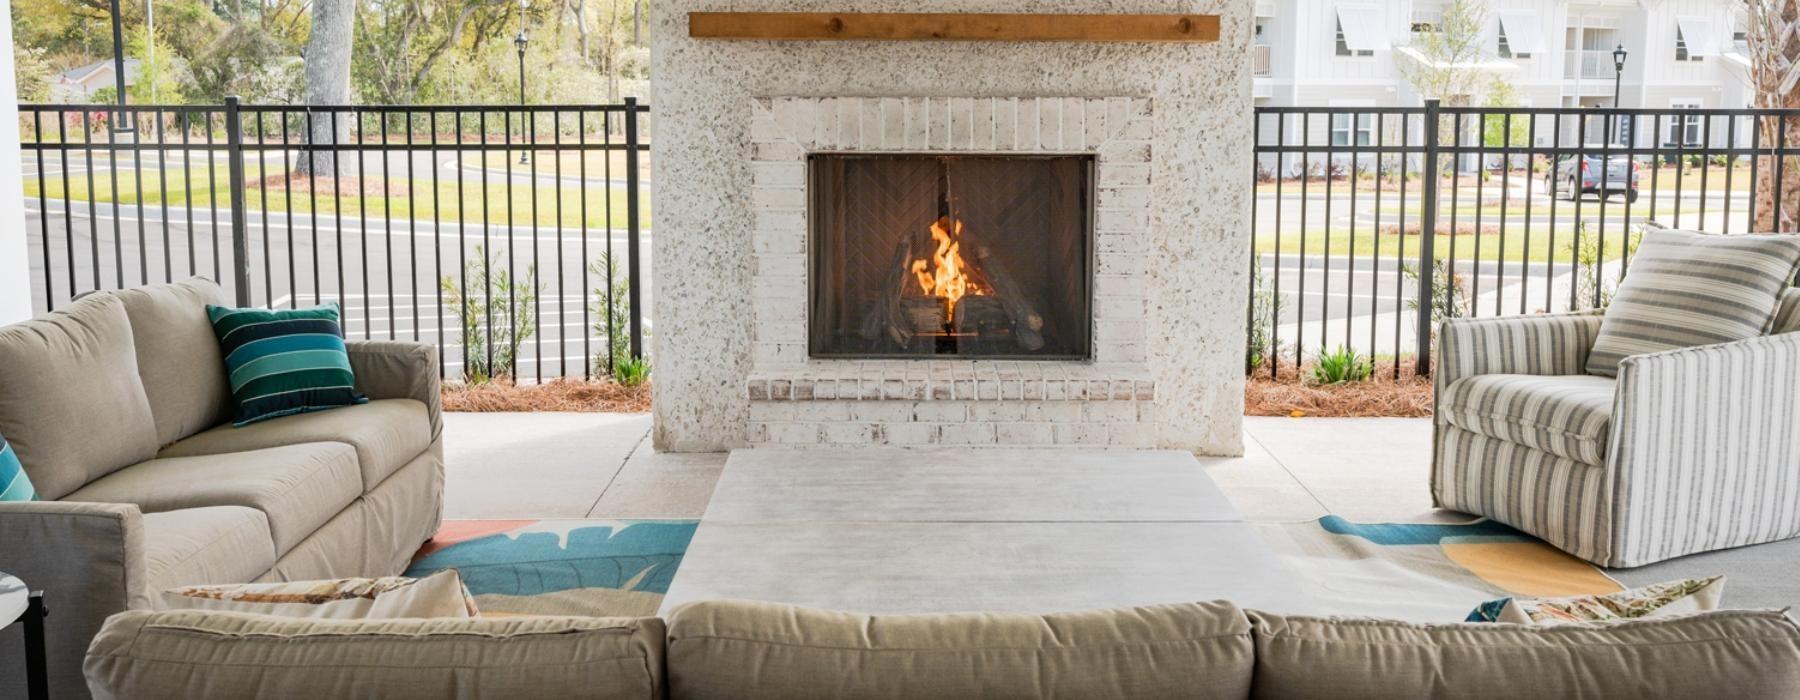 an outdoor fireplace with chairs and a couch